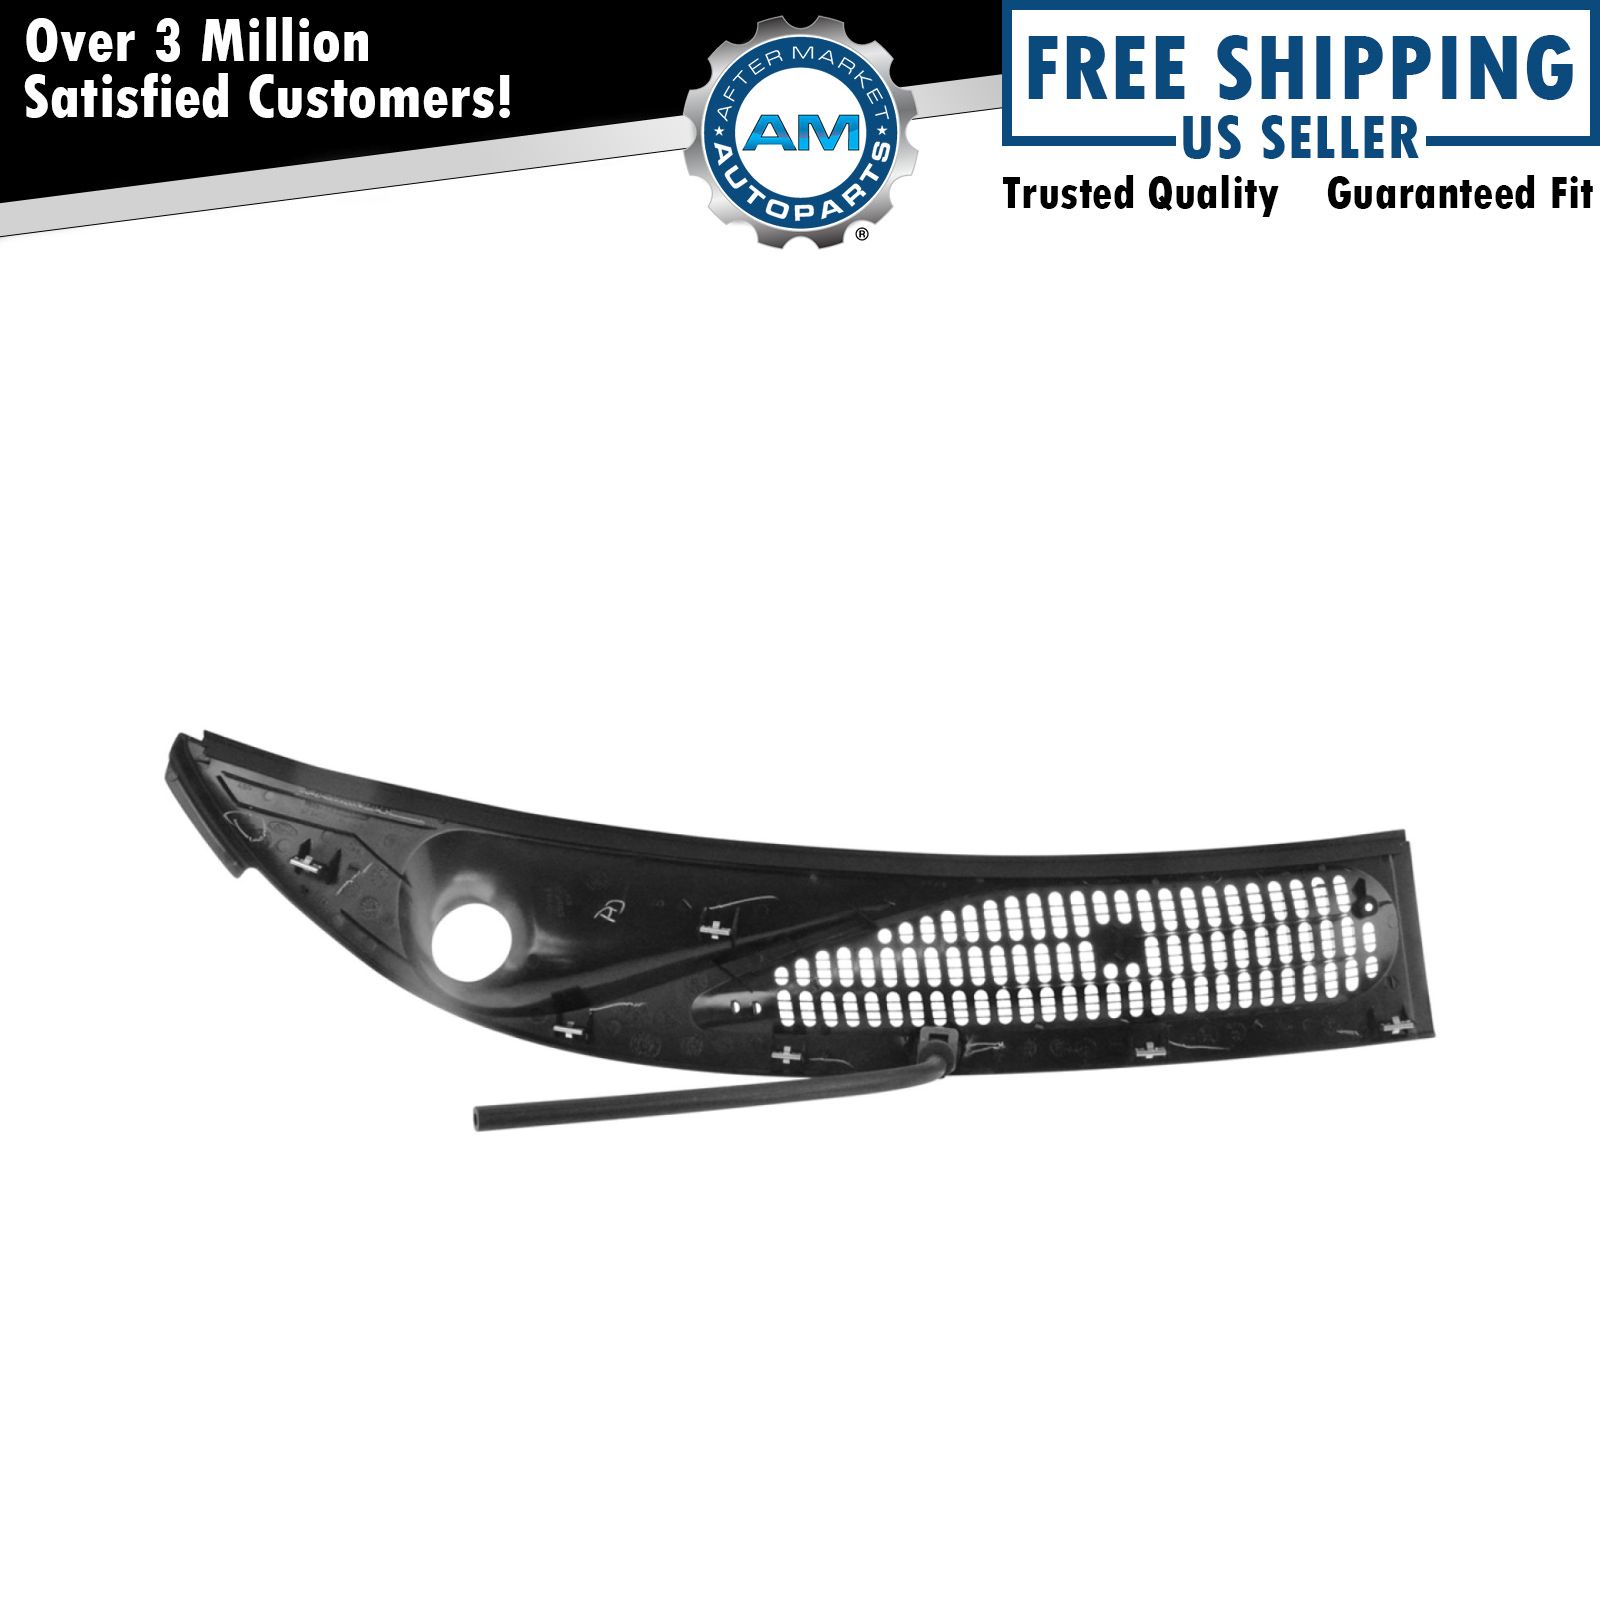 OEM Windshield Wiper Cowl Grille Panel for Ford Explorer Mercury Mountaineer New